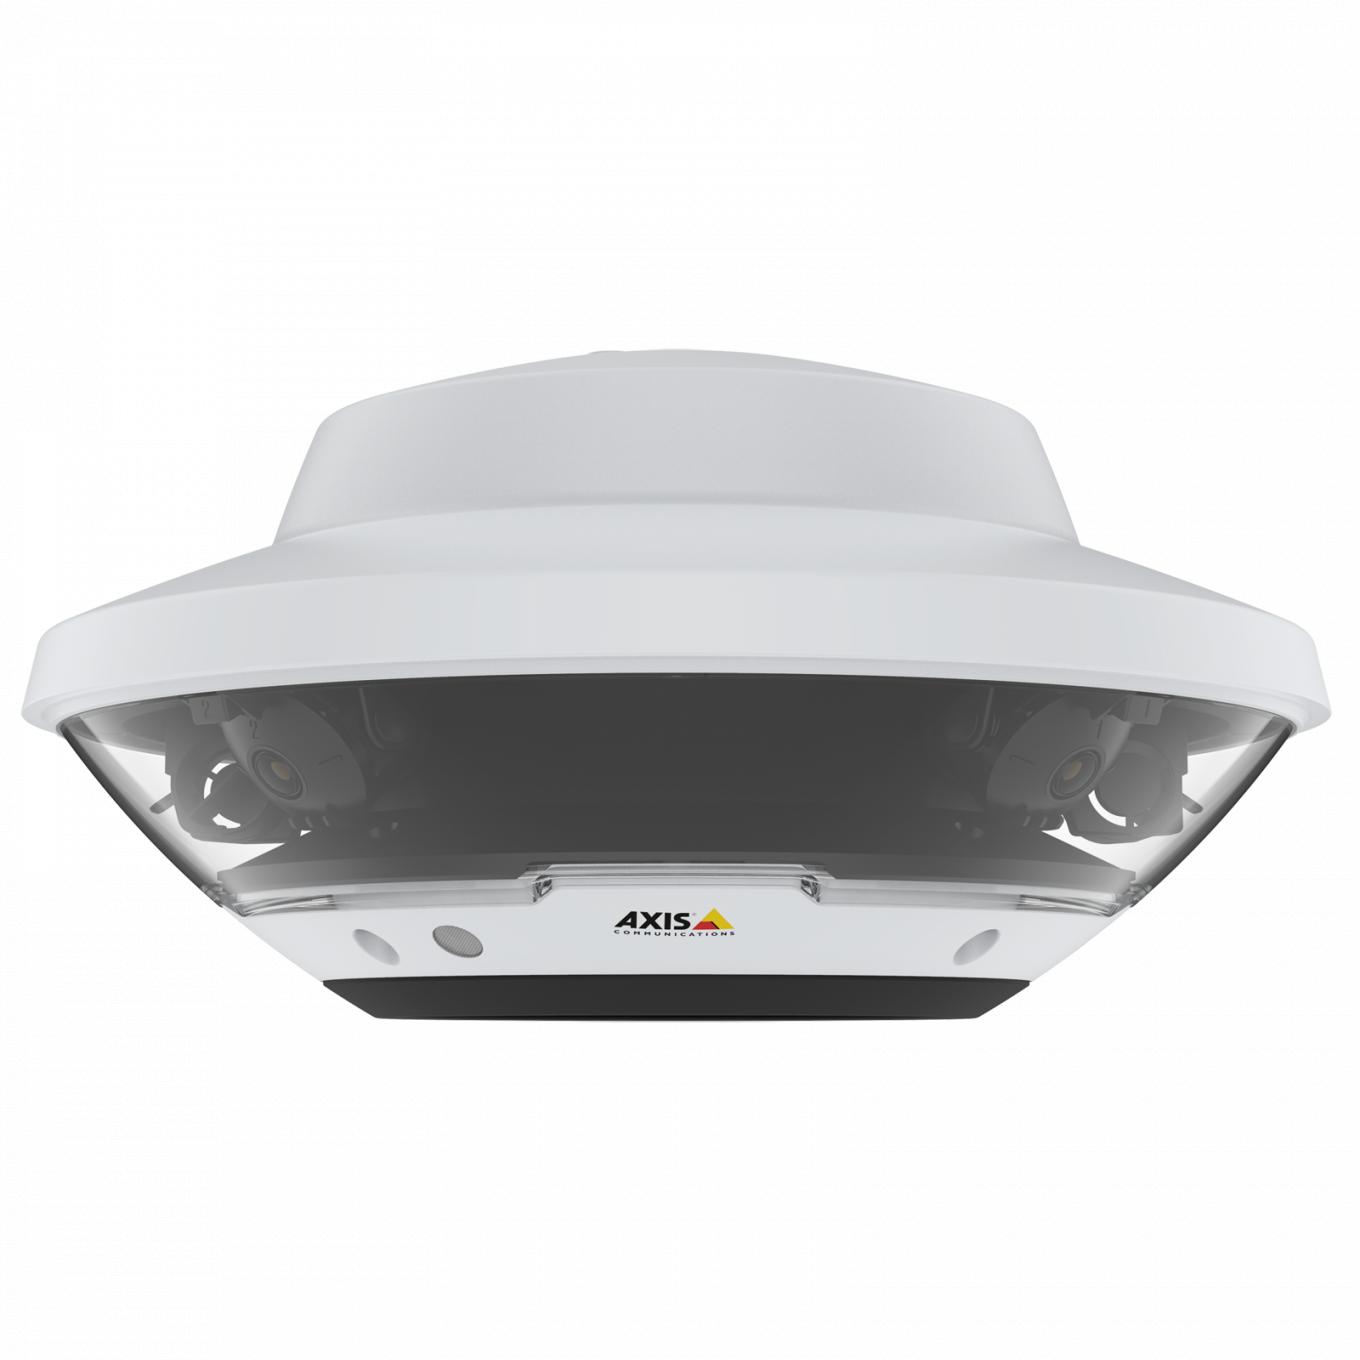 q6100e - mounted in ceiling